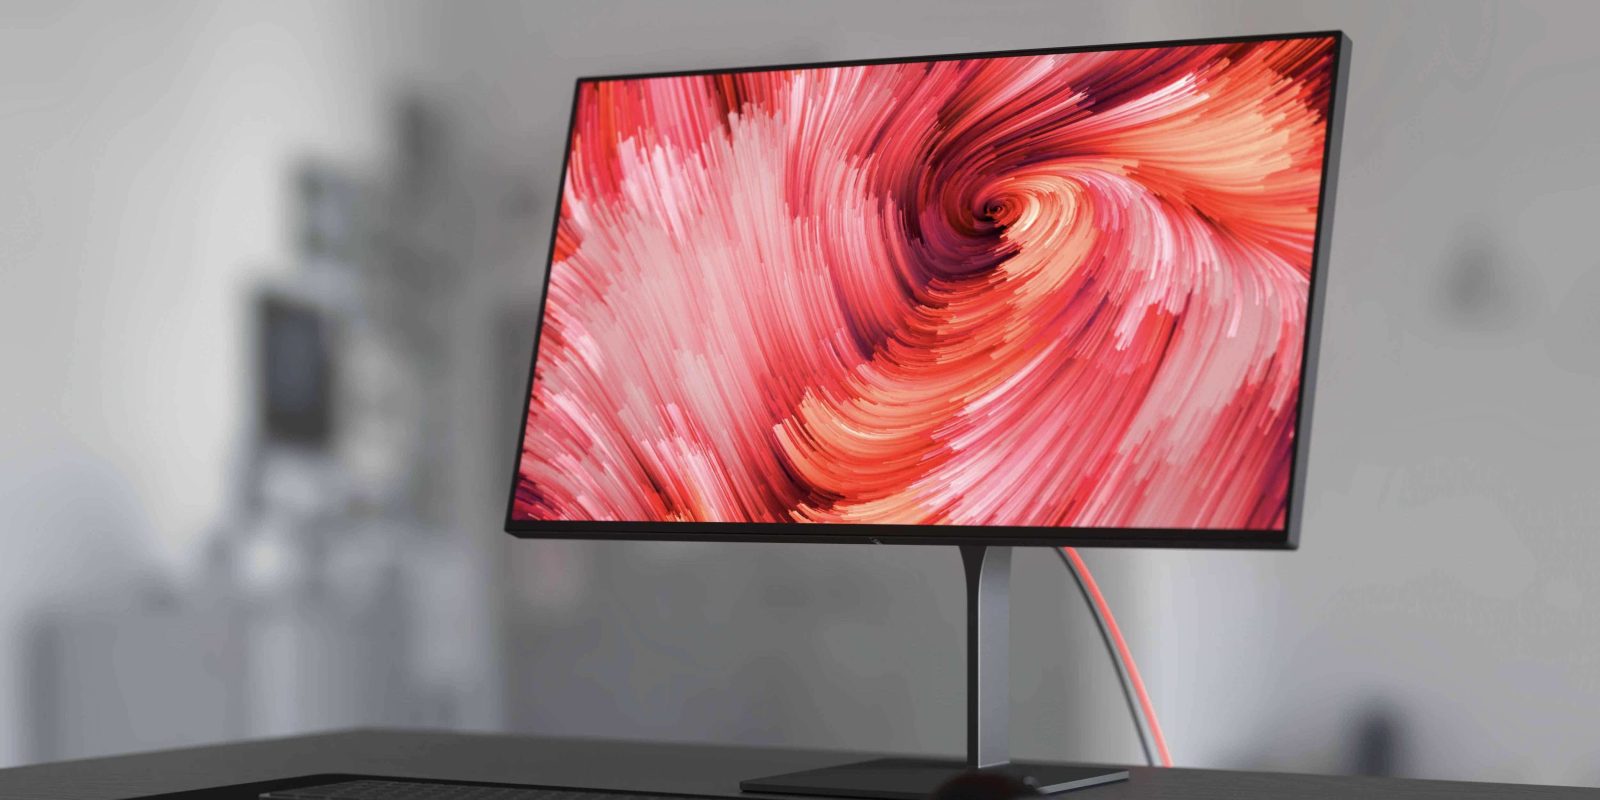 4K OLED 120Hz monitor from LG is made for gaming - 9to5Toys